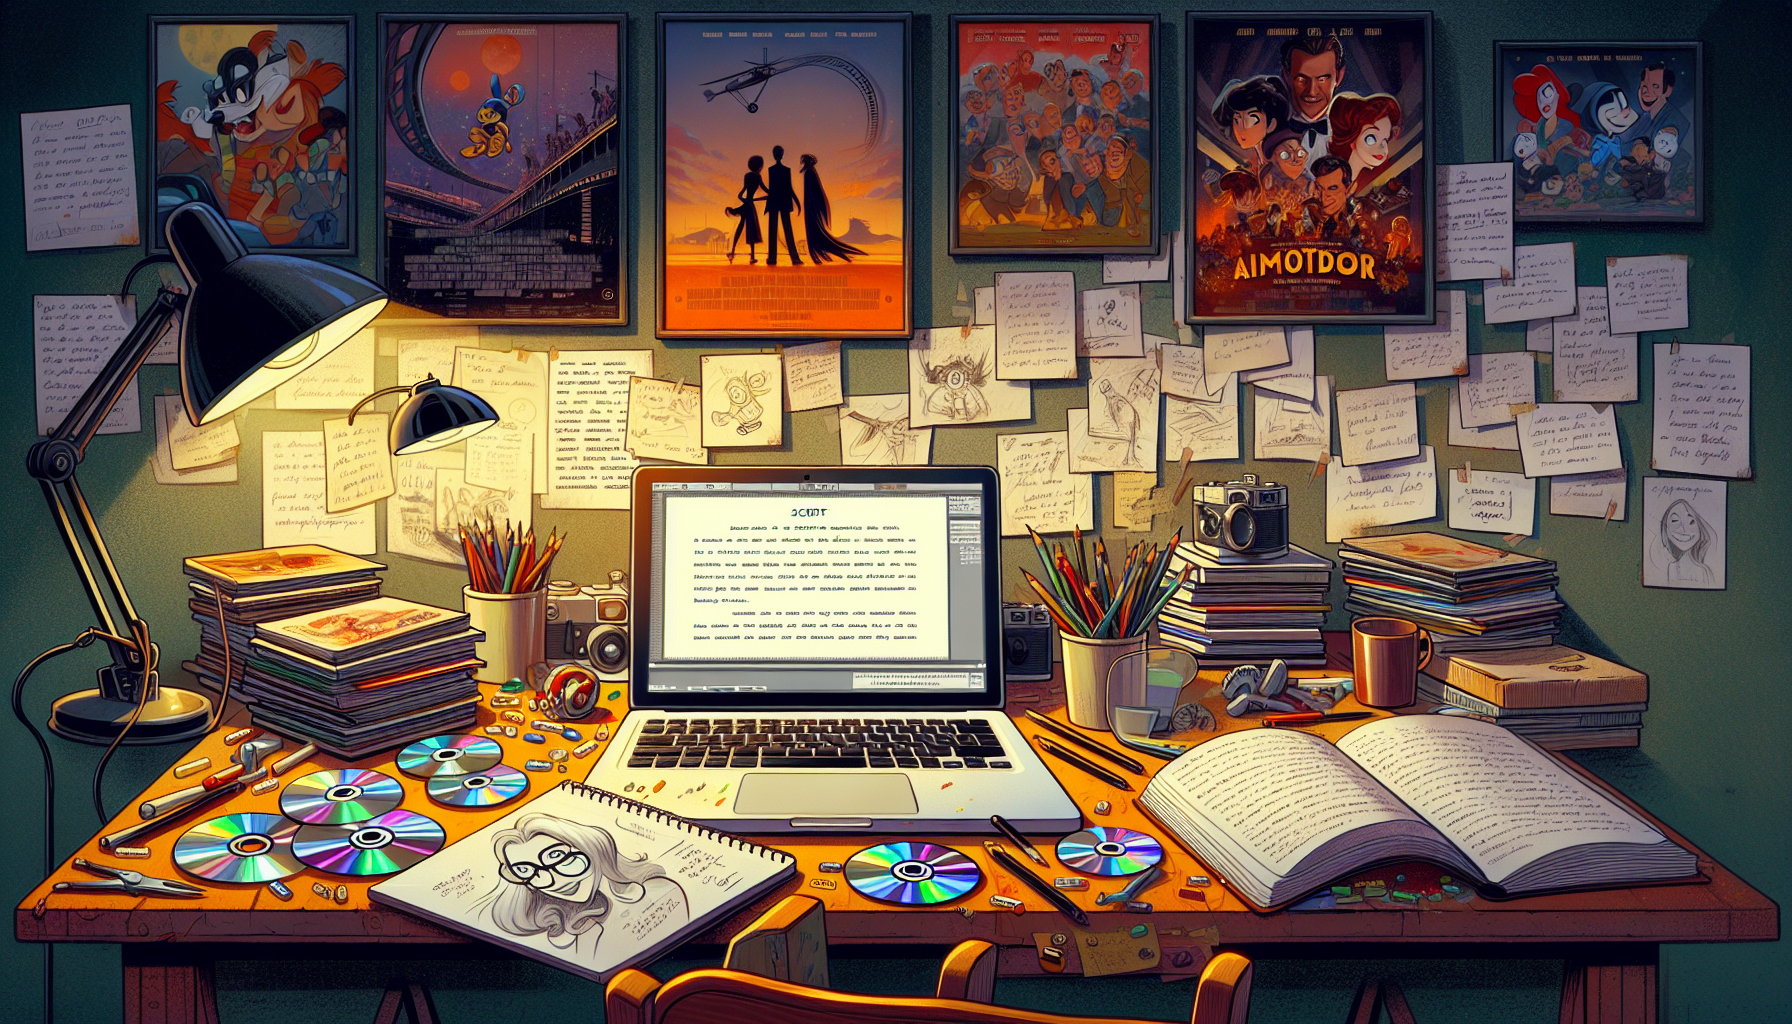 An artistically cluttered screenwriter's desk with an open laptop displaying a script, surrounded by classic animated movie DVDs, a sketchpad filled with character designs, and notes on animation trop